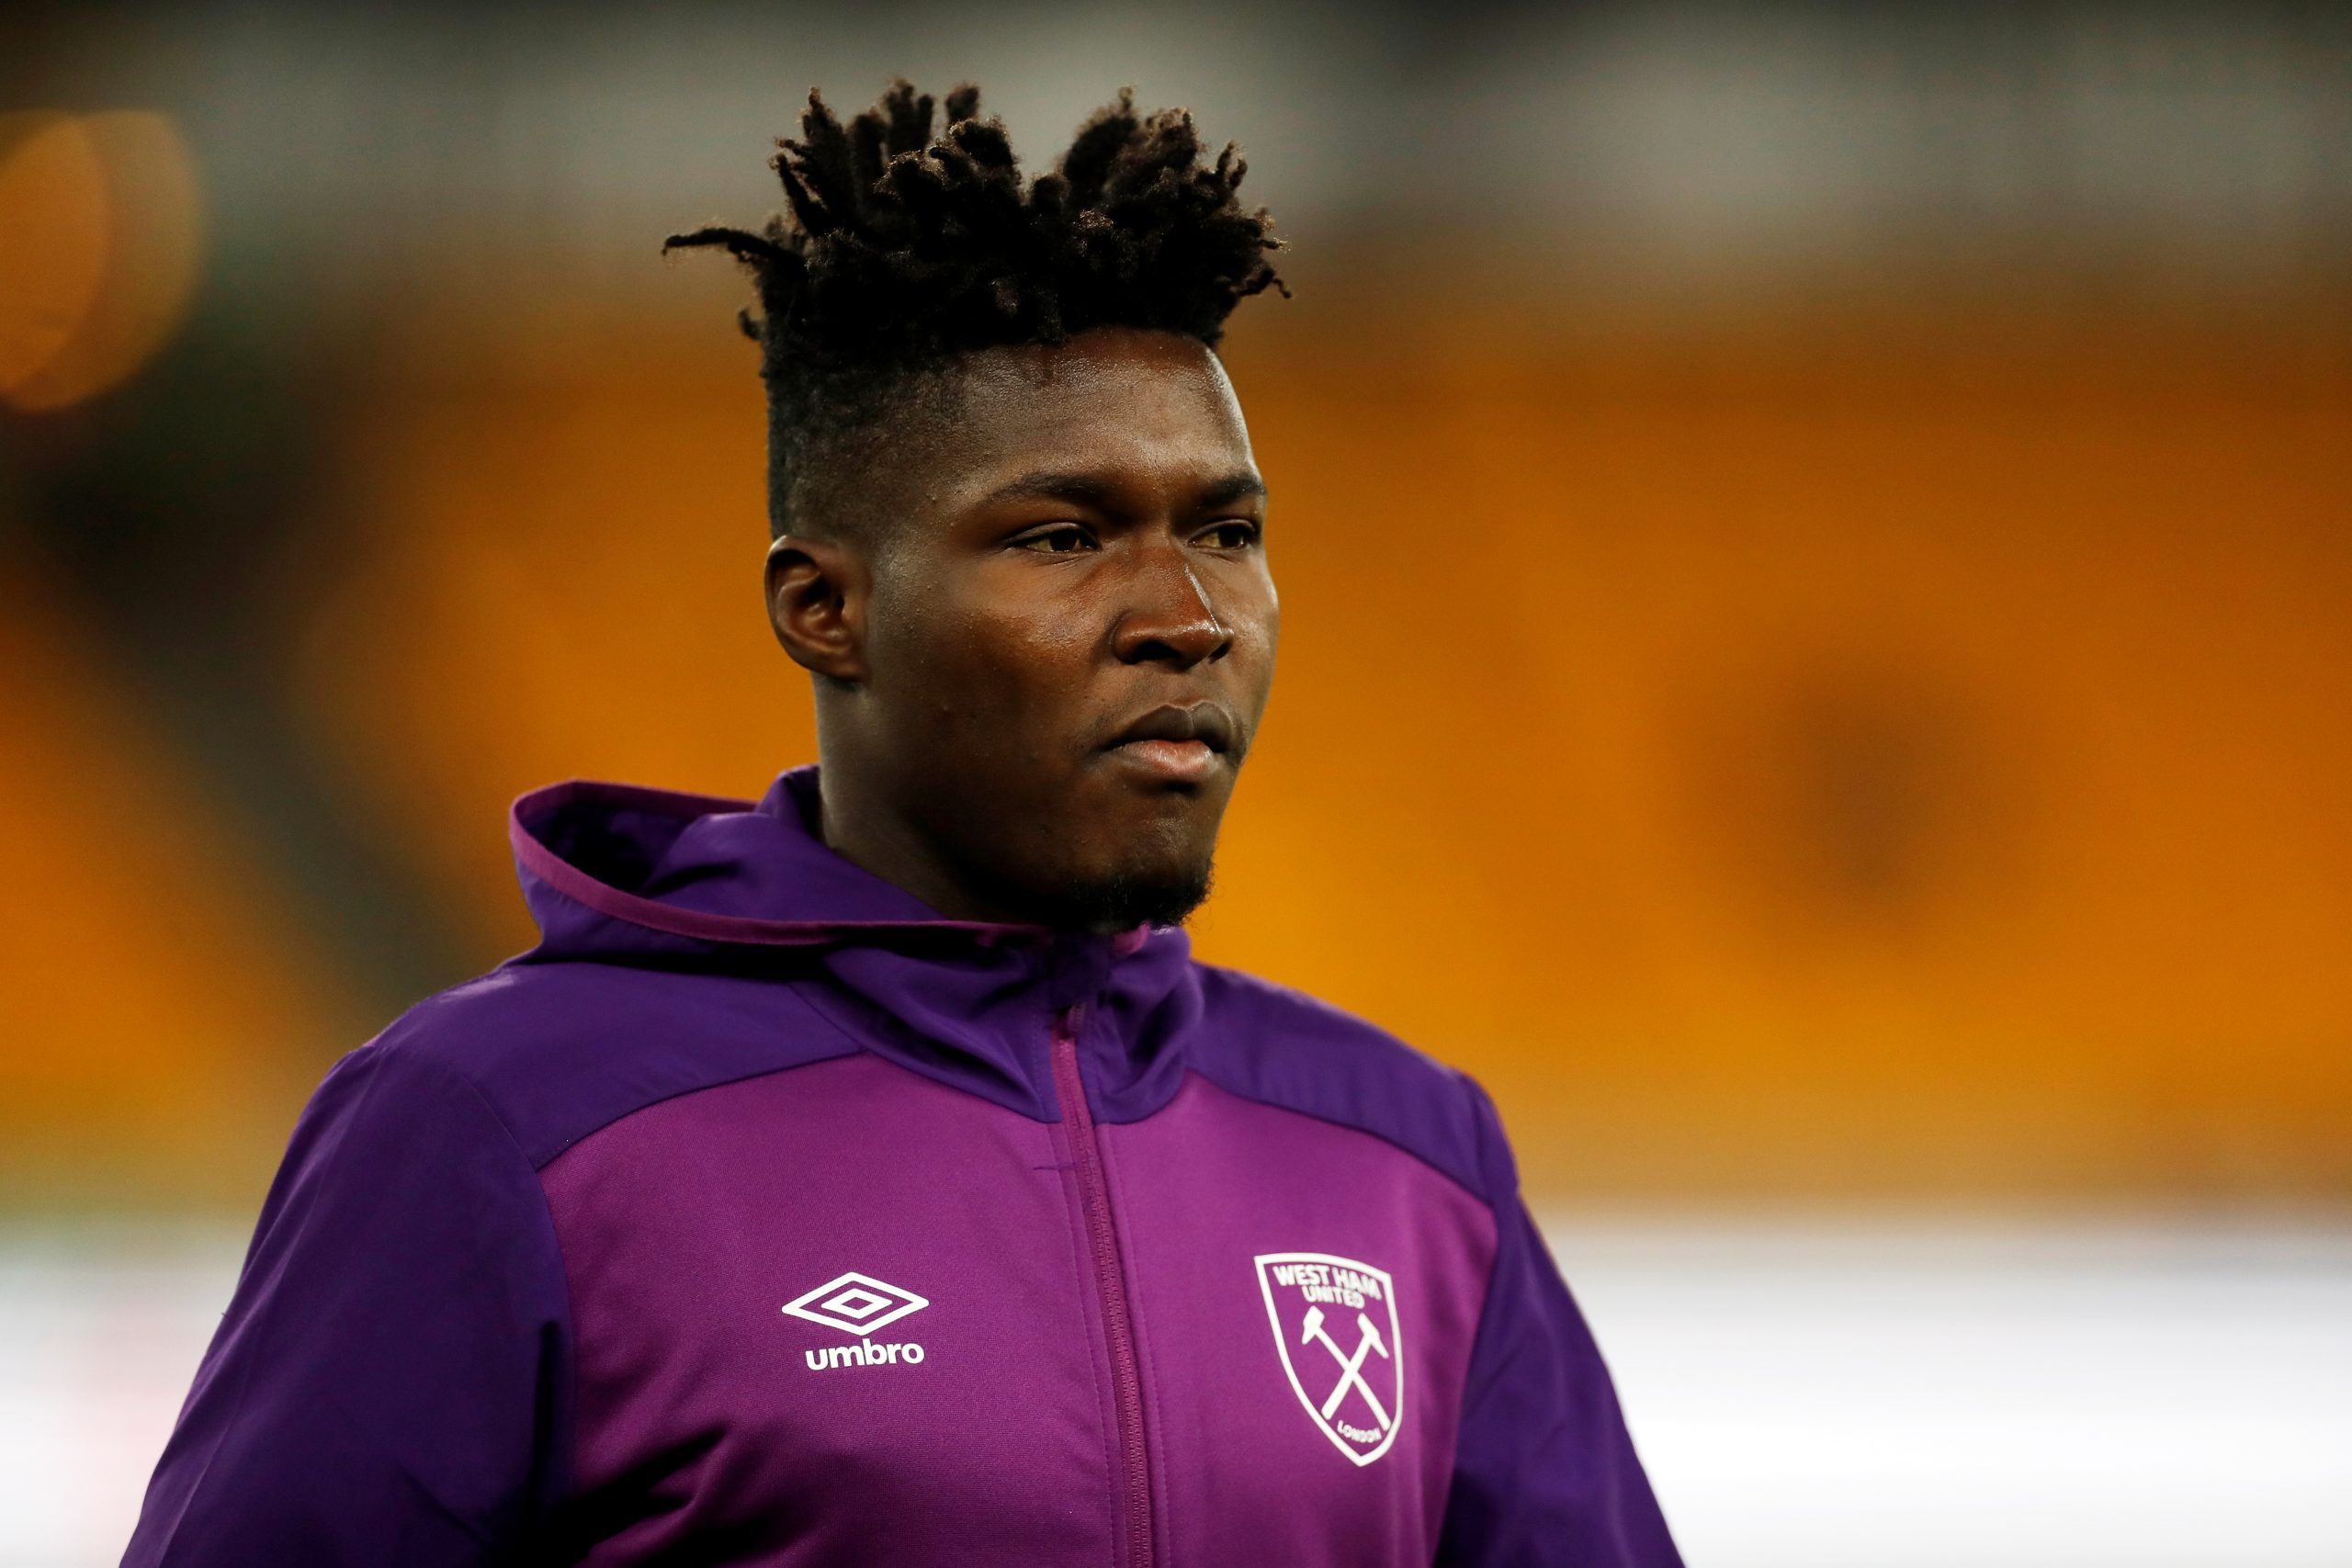 Soccer Football - Premier League - Wolverhampton Wanderers v West Ham United - Molineux Stadium, Wolverhampton, Britain - December 4, 2019  West Ham United's Joseph Anang before the match   Action Images via Reuters/Matthew Childs  EDITORIAL USE ONLY. No use with unauthorized audio, video, data, fixture lists, club/league logos or 